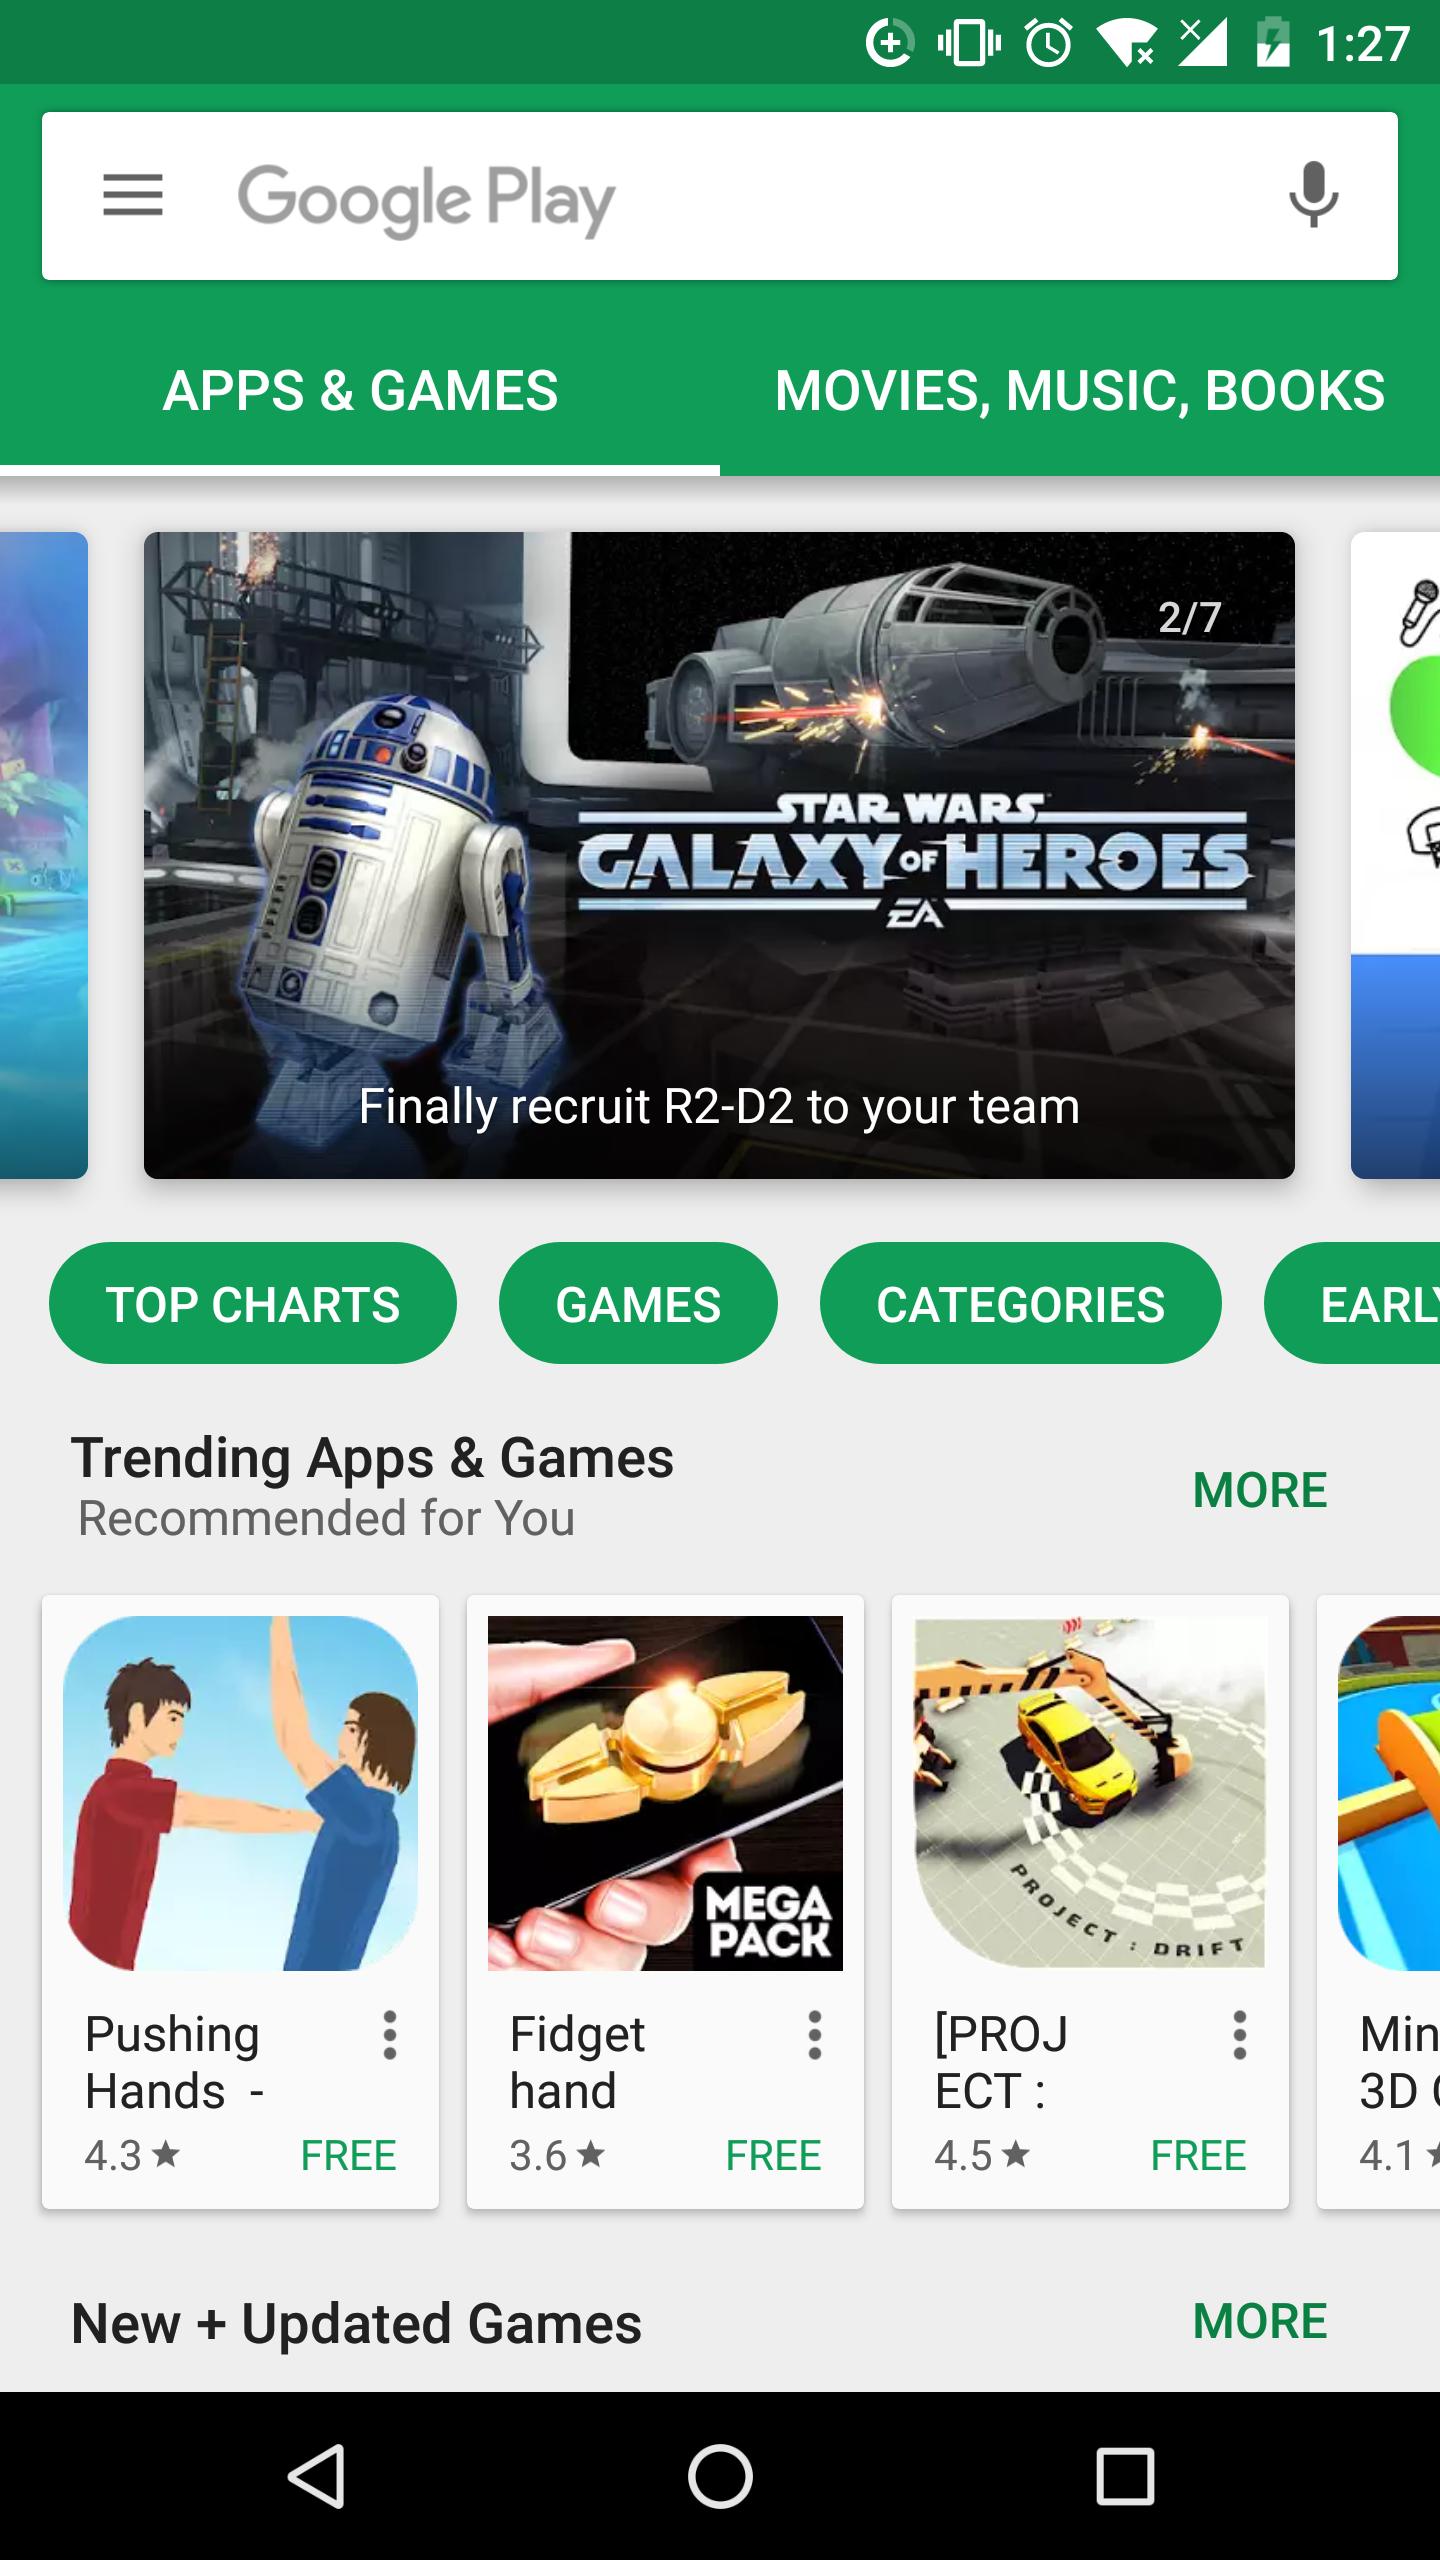 Play Store Google Play Games Free Download